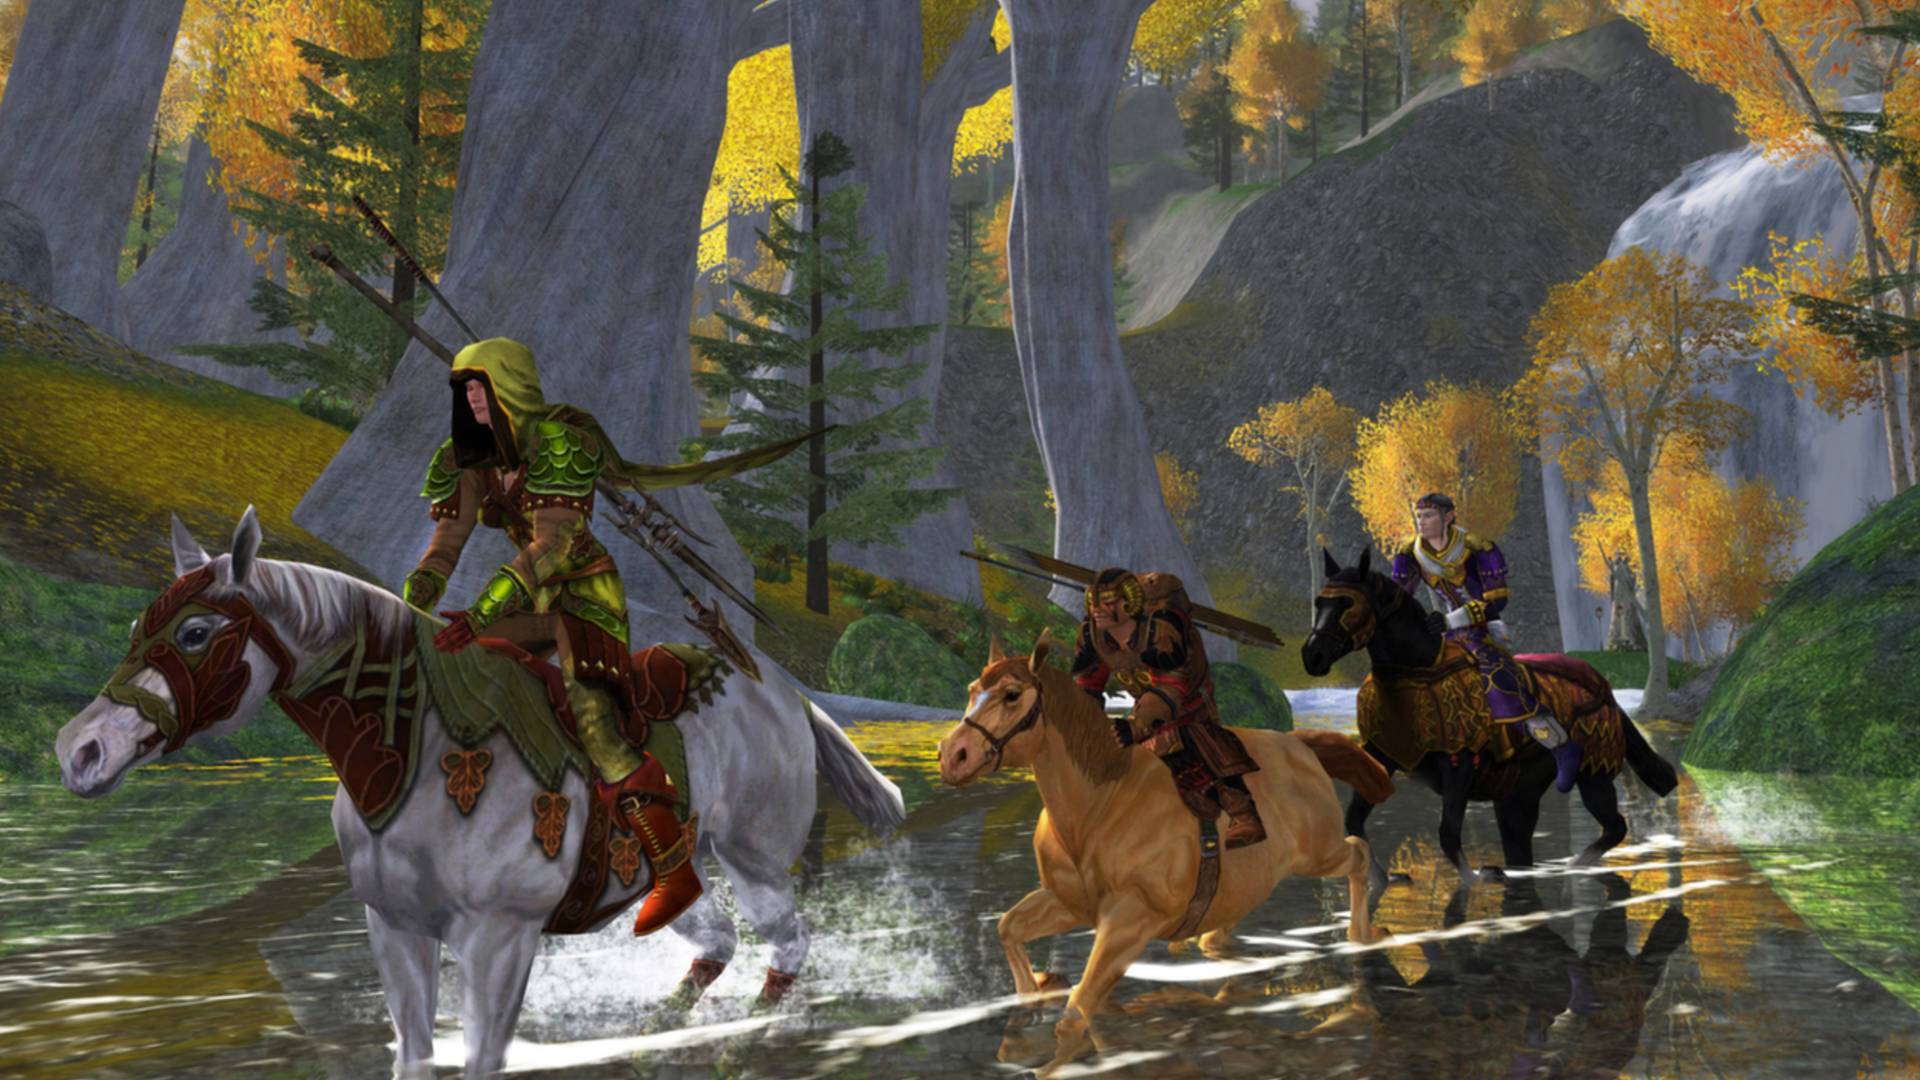 Best free MMOs: Lord of the Rings Online. Image shows a procession of people on horses riding down a river.